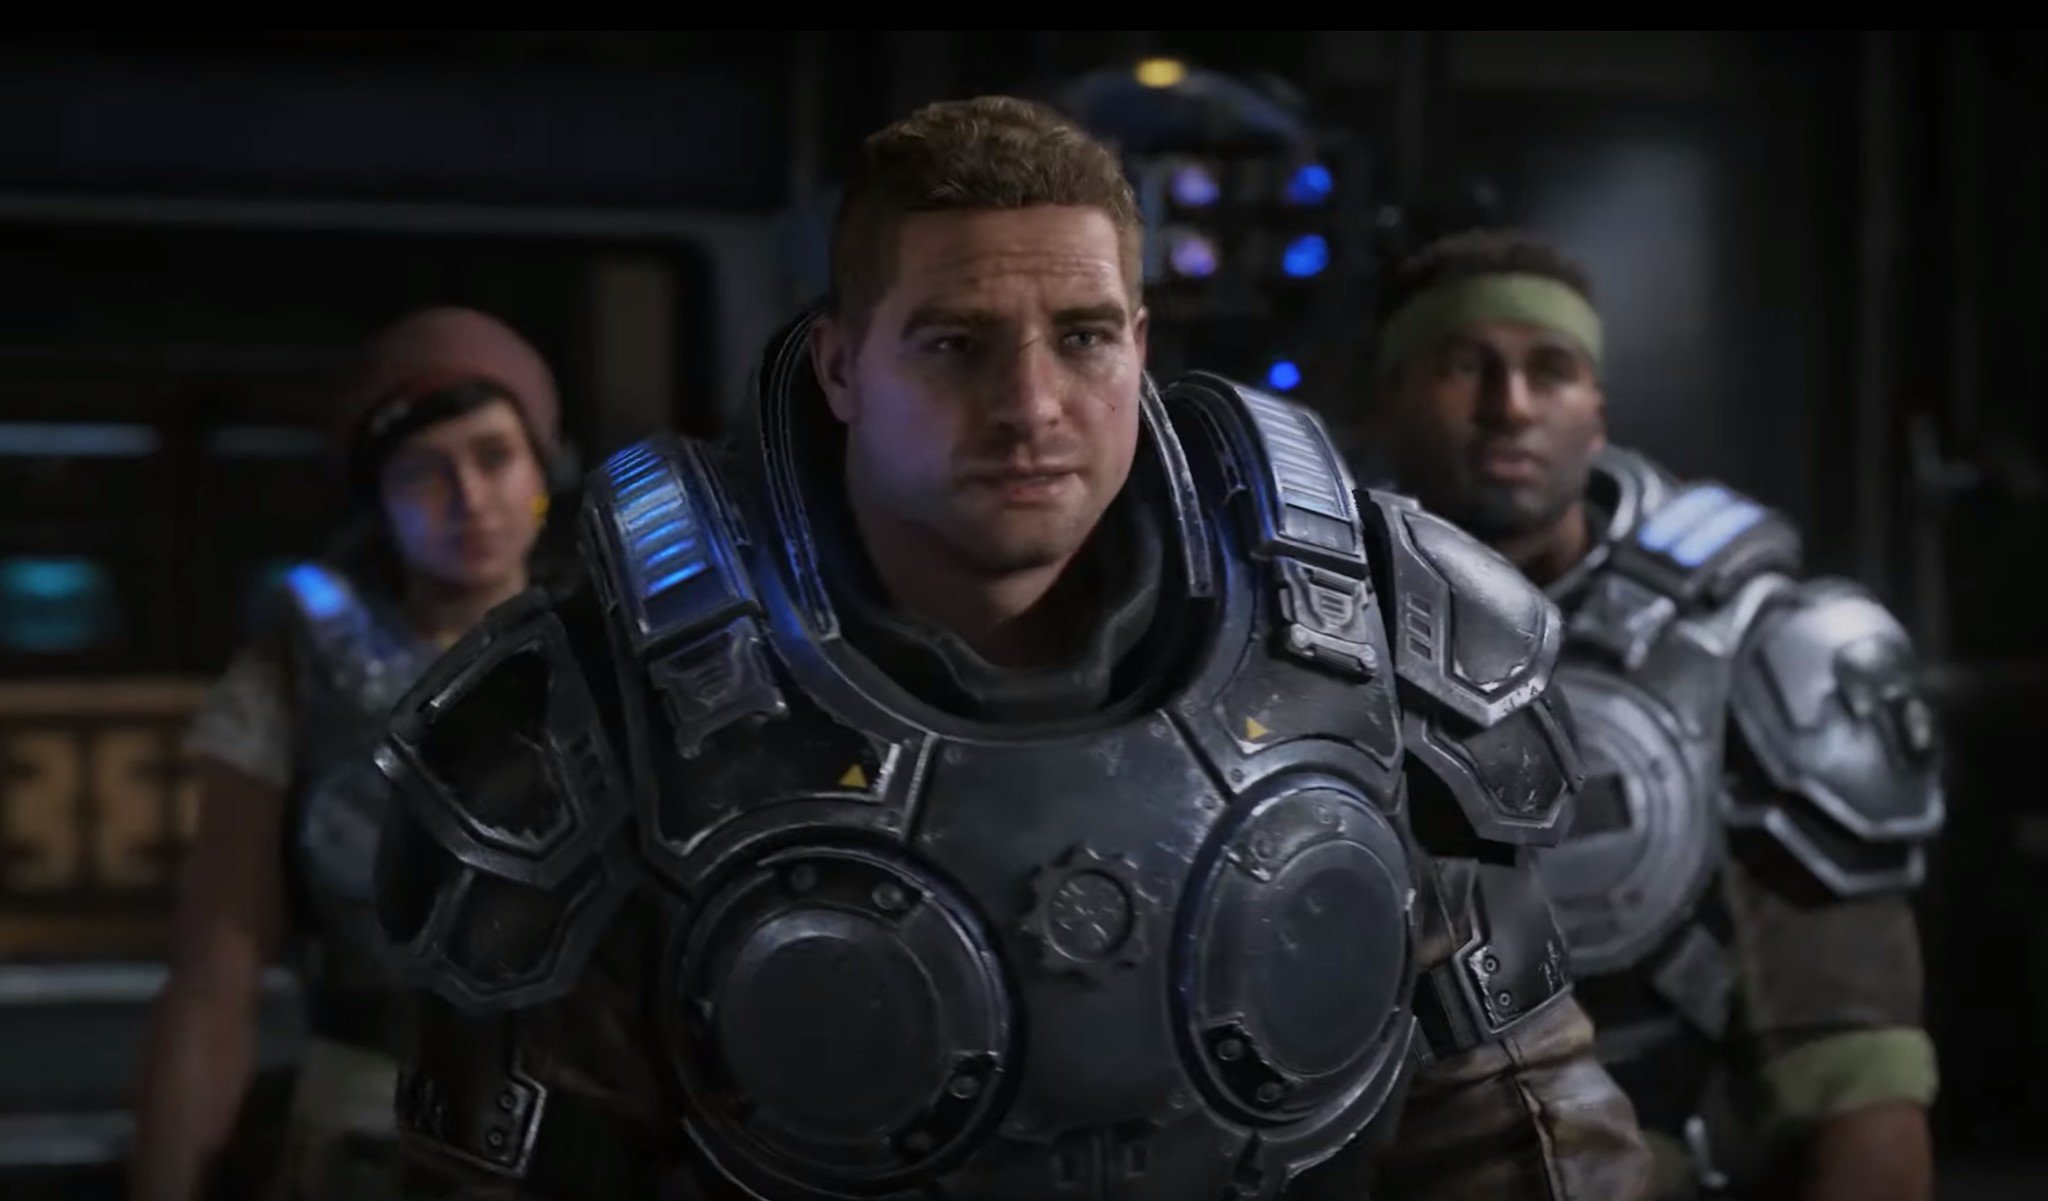 Ryan Cleven on Gears 5's Horde mode, working on a legacy franchise